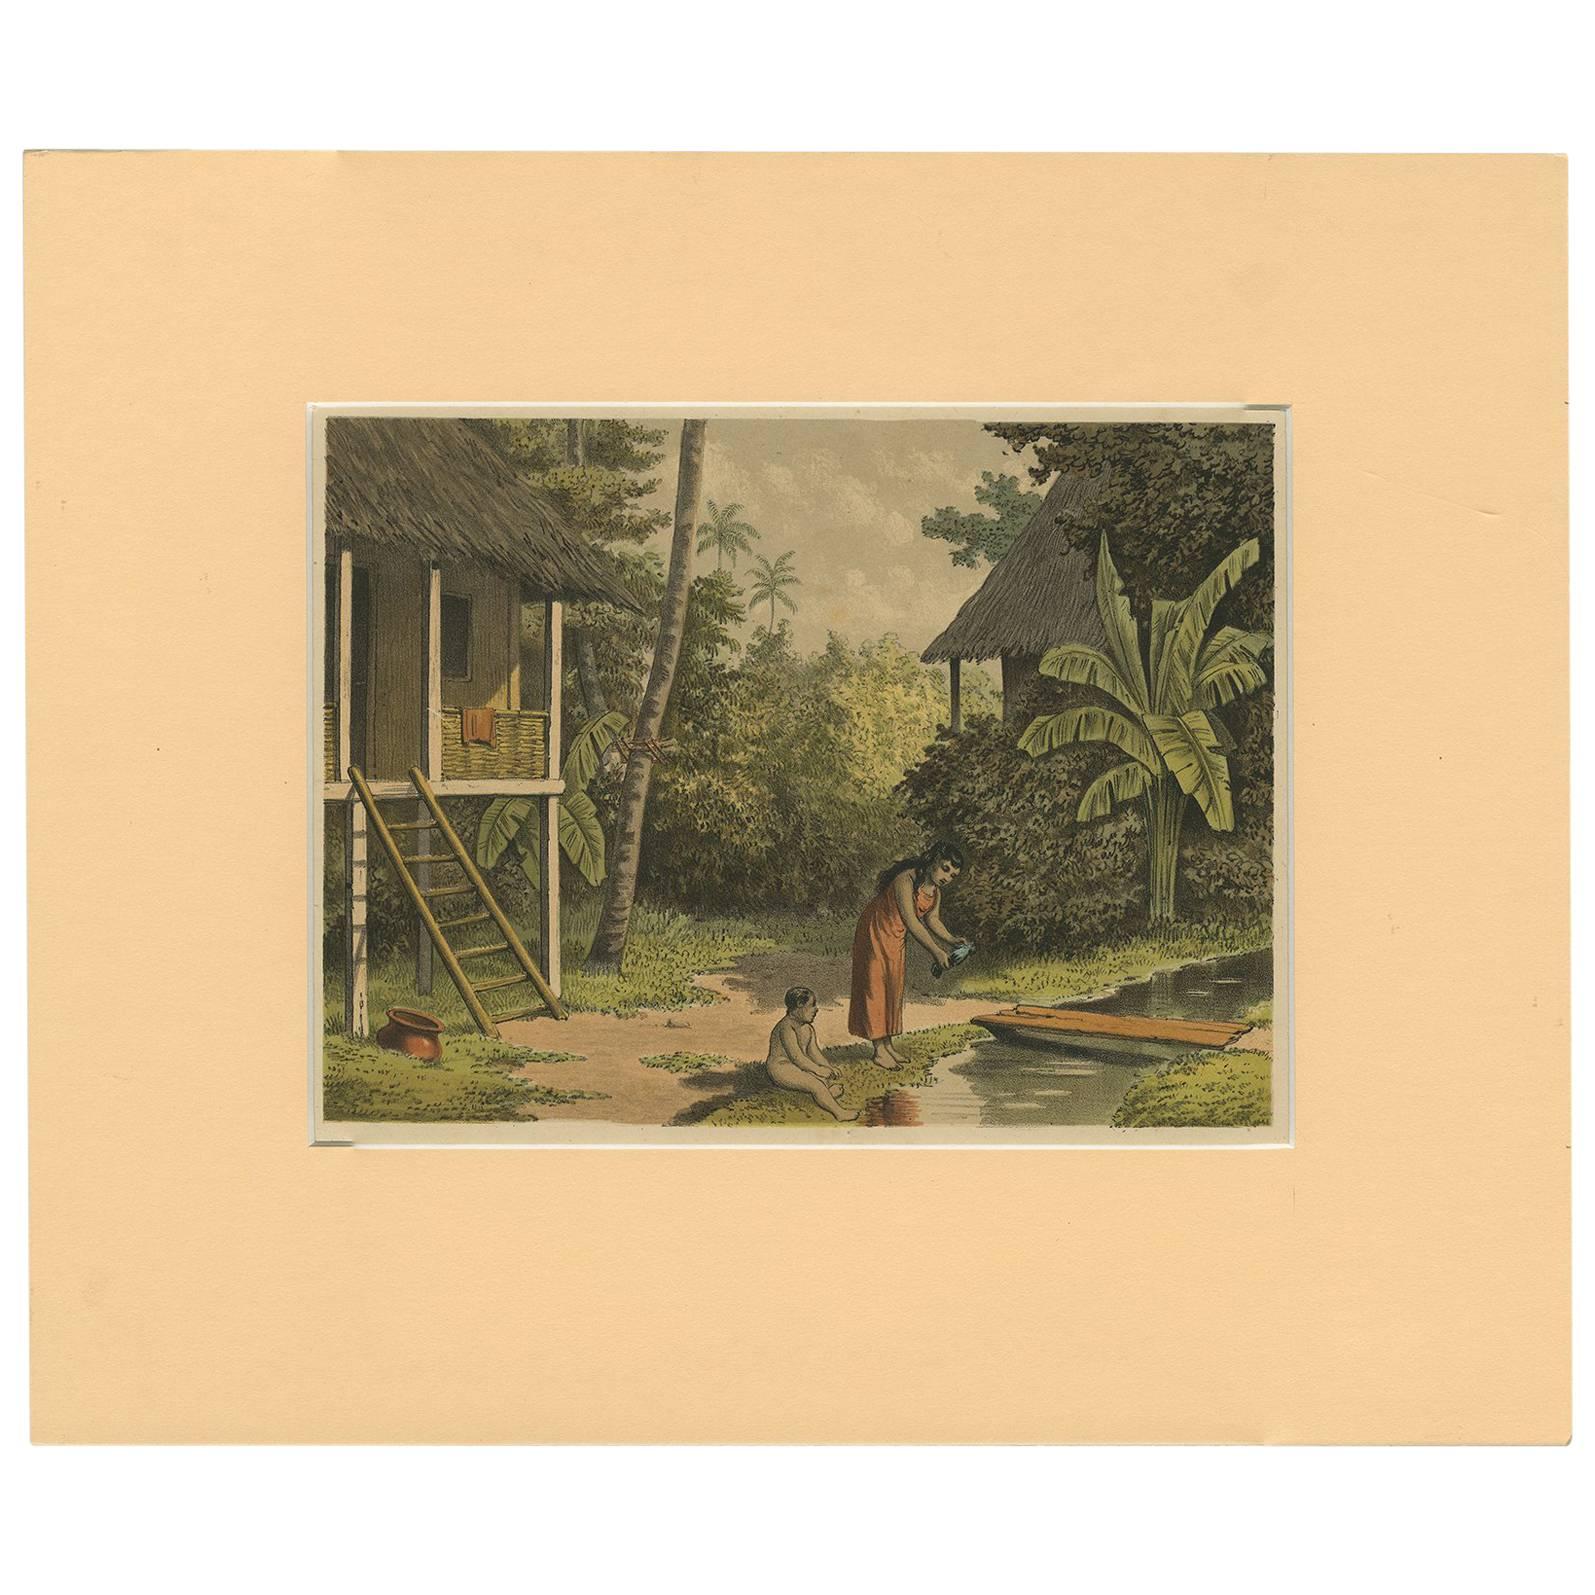 Antique Print of a House in Oleh-Leh, on Atjeh 'Sumatra, Indonesia' by Perelaer For Sale